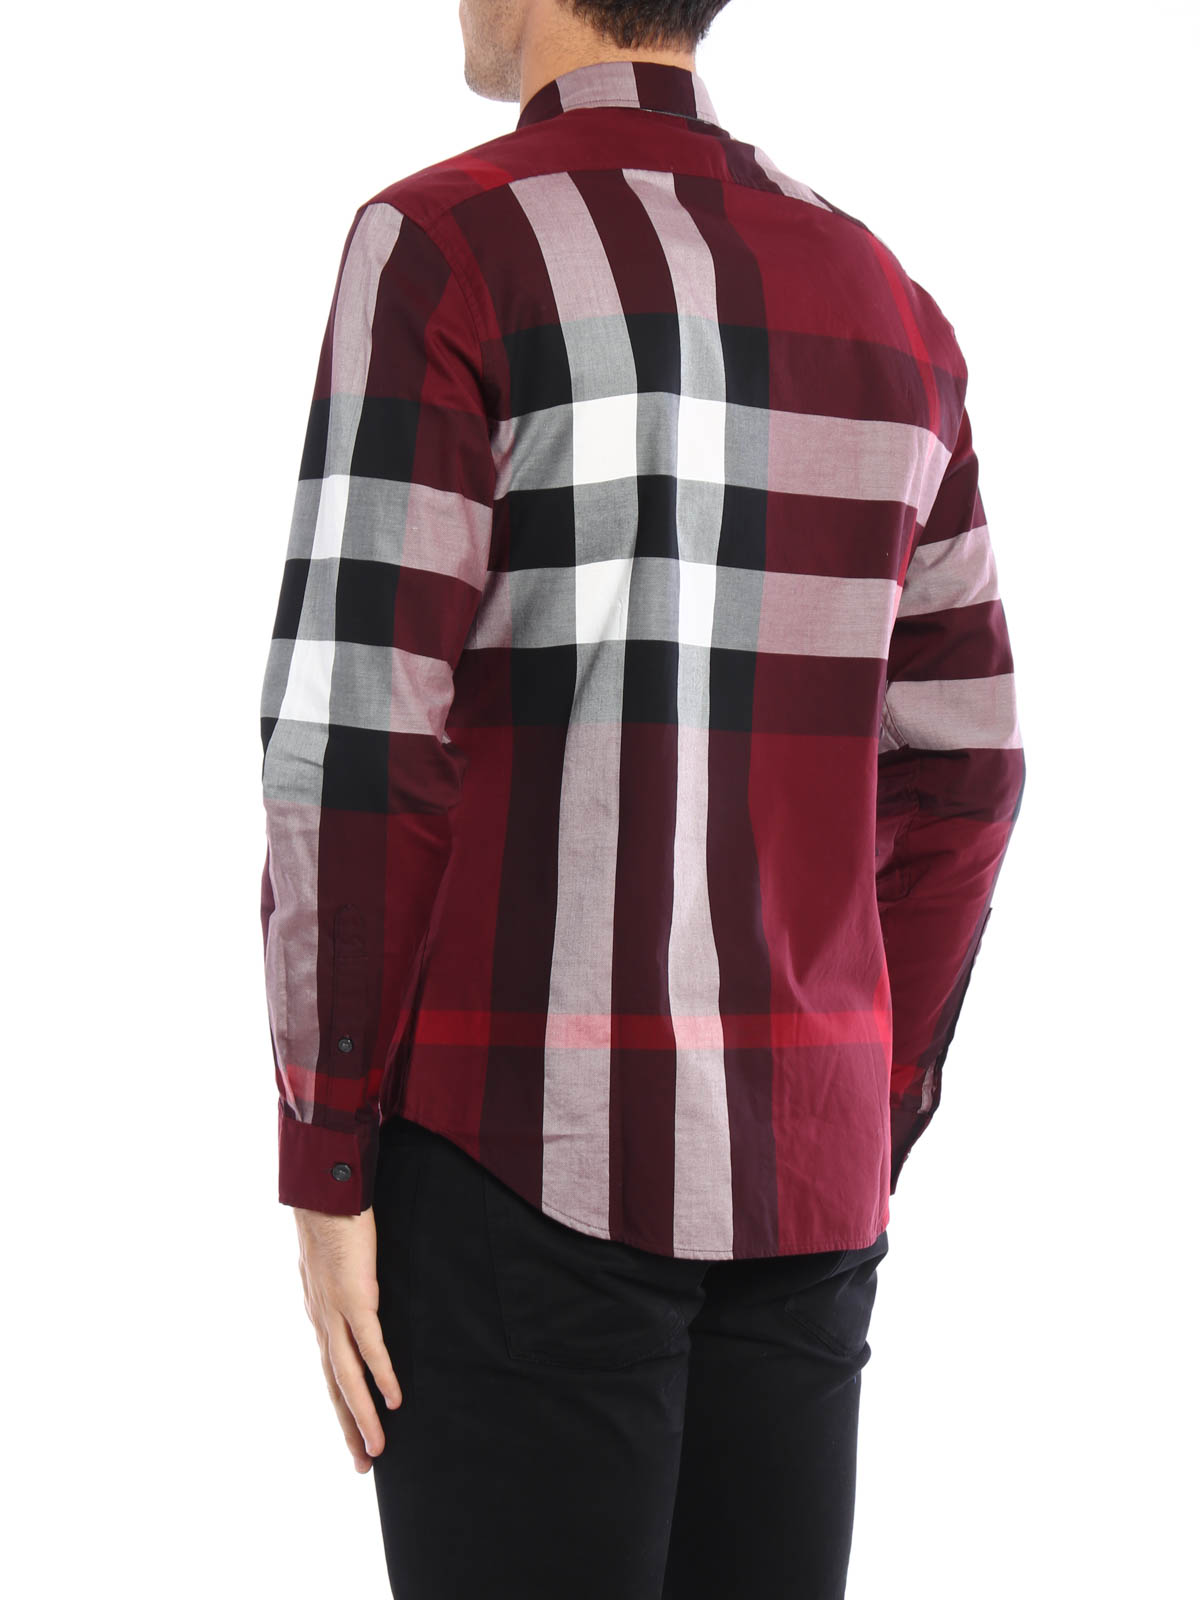 Camisas Burberry - Camisa Fred - Rojo Oscuro - 3996107 